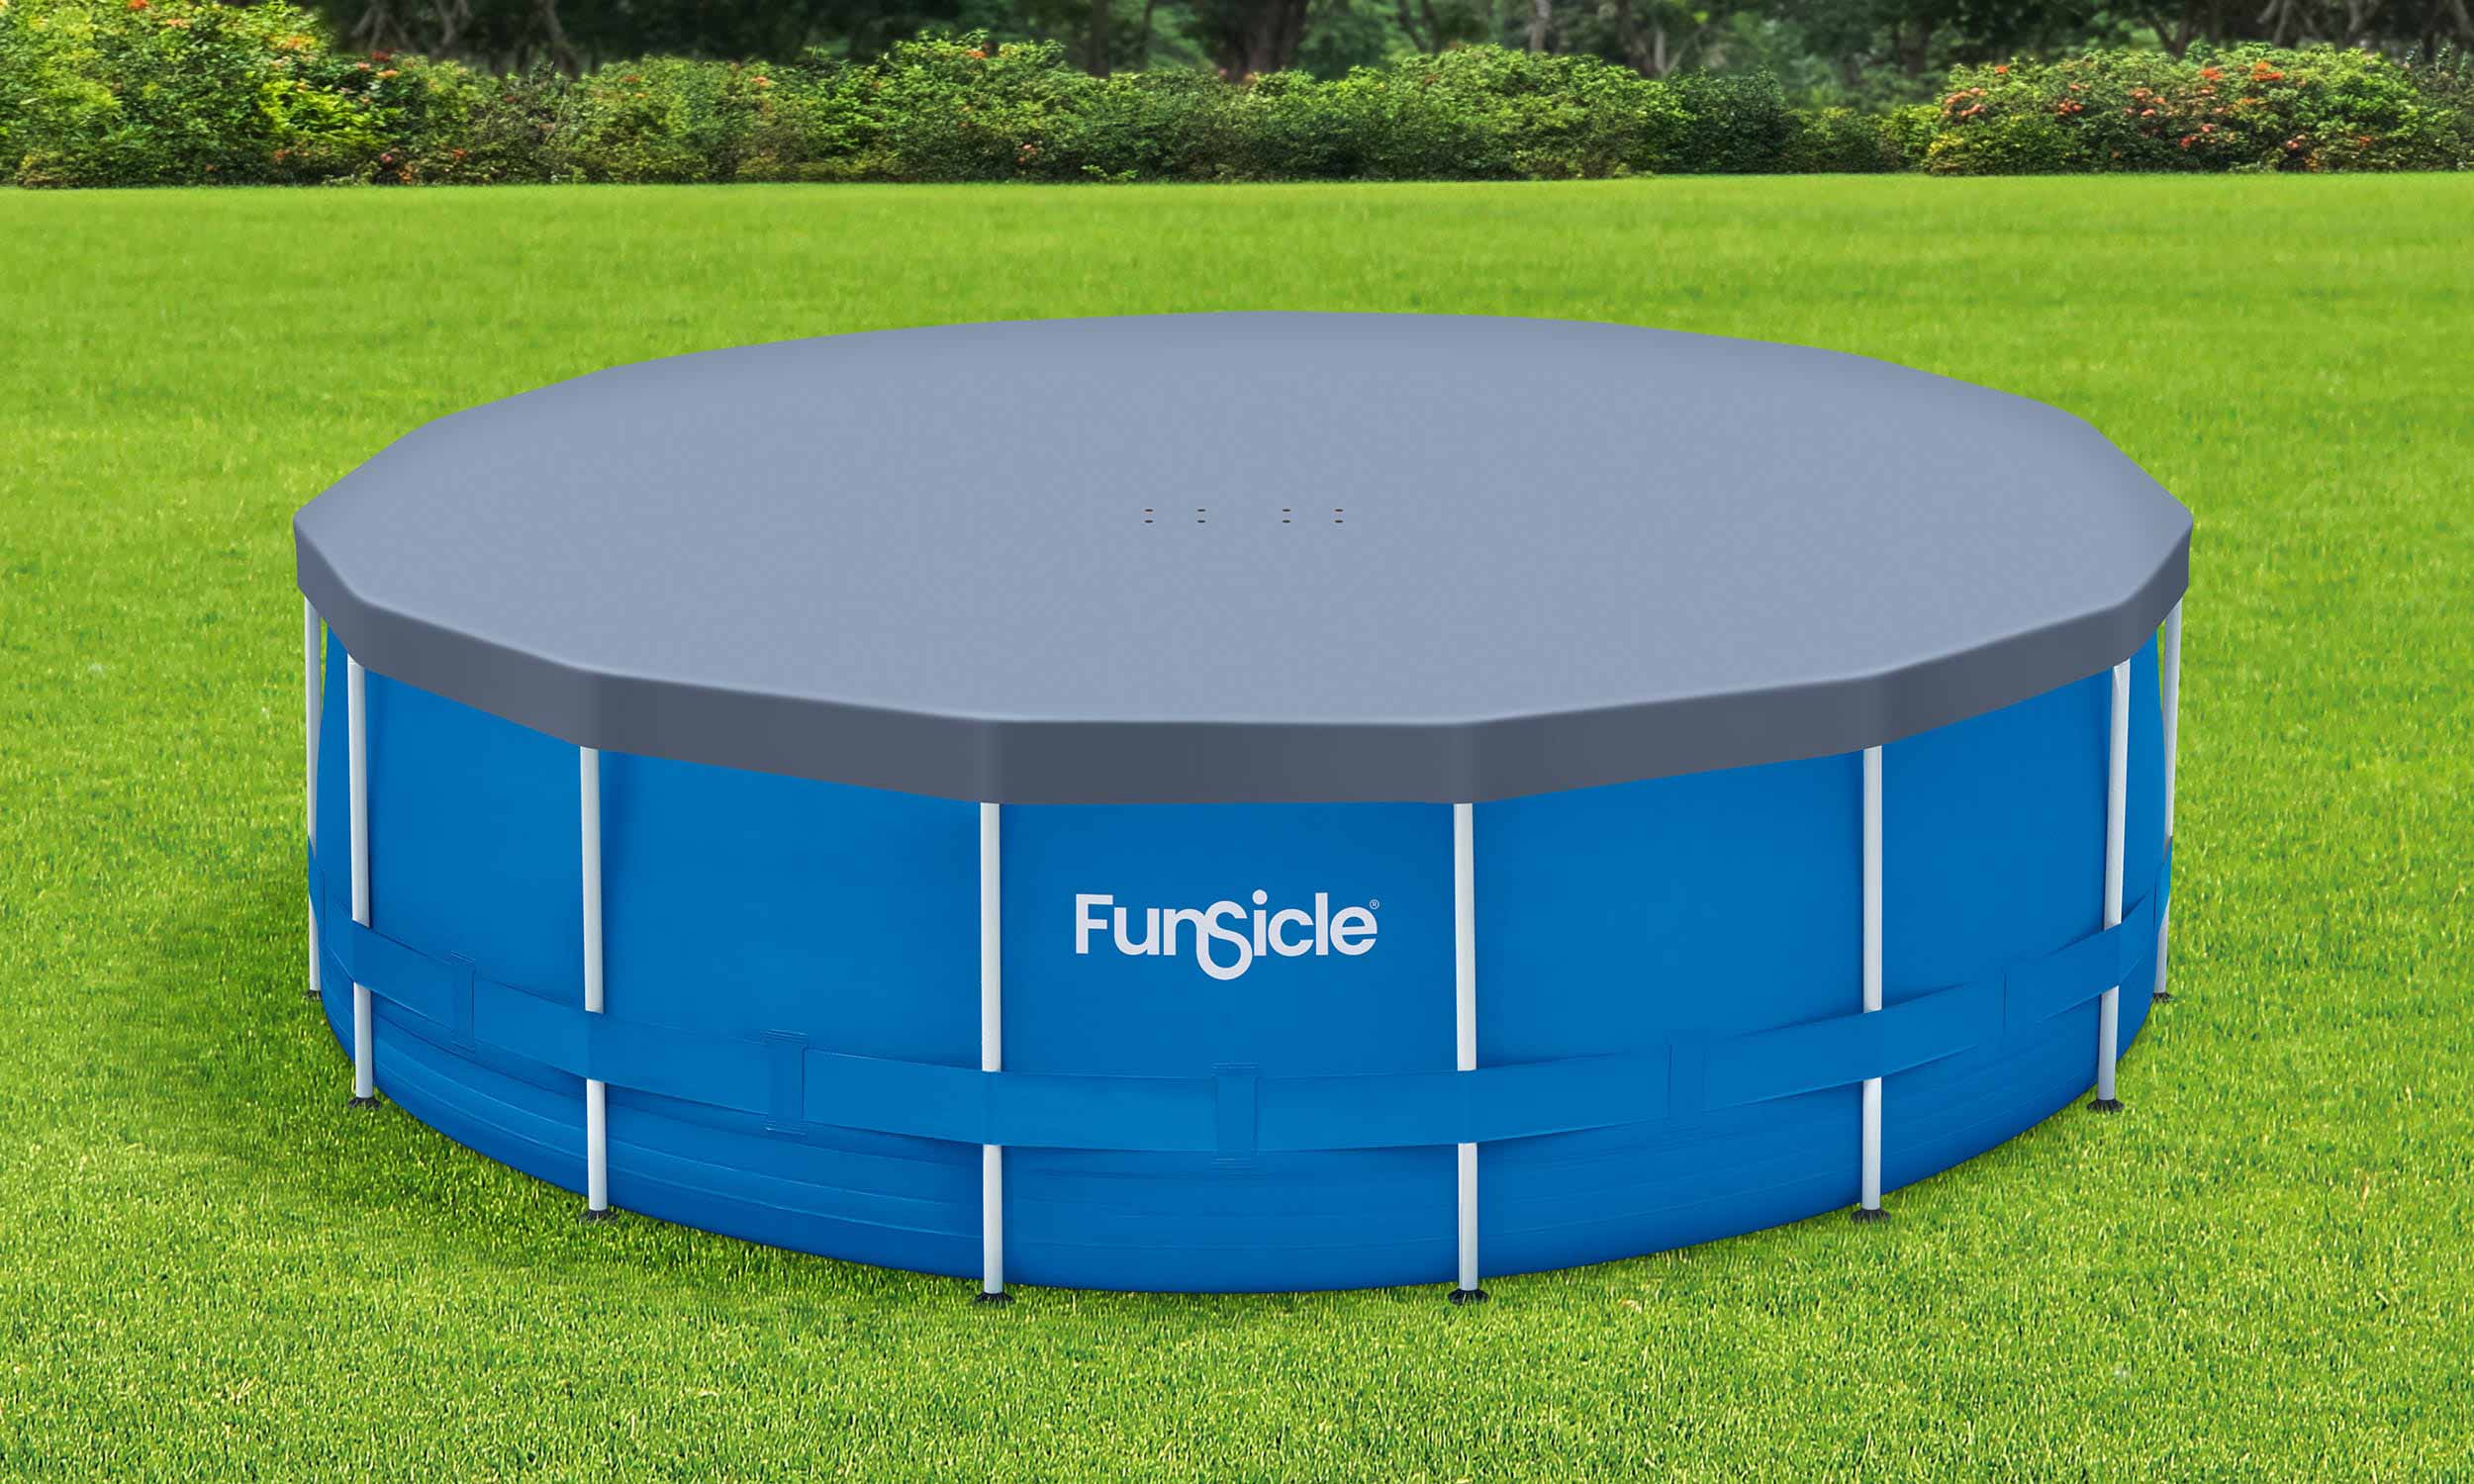 Funsicle 15ft Frame Pool Cover with a pool on a grass field